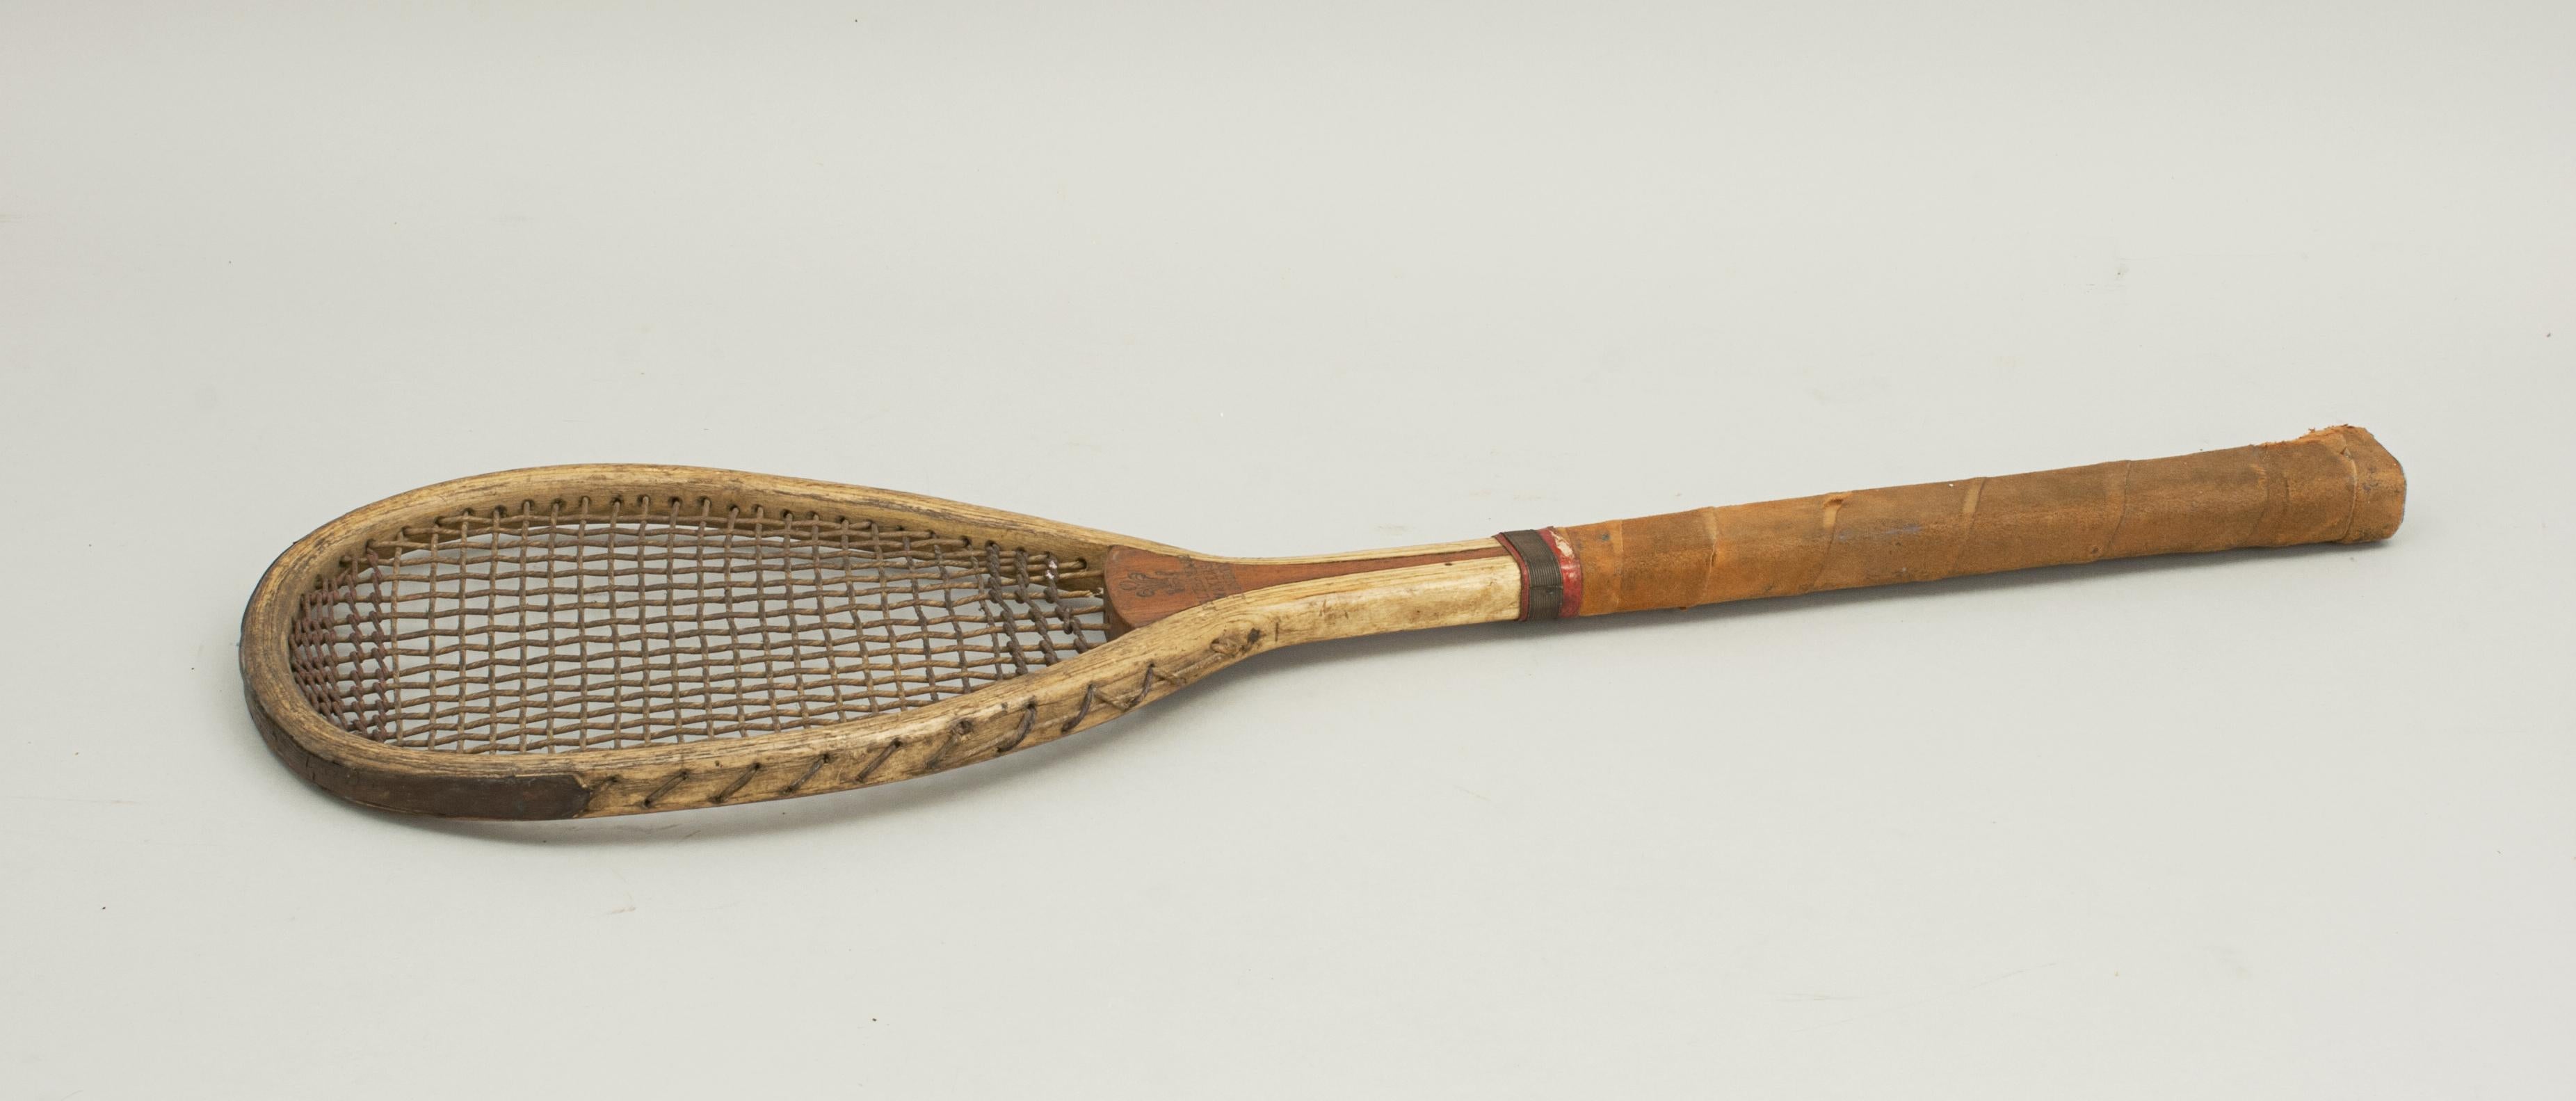 Antique lopsided Feltham Lawn tennis racket, 'The Alexandra'.
A rare, early lopsided (tilt head or teardrop shape) lawn tennis racquet in good original condition by Feltham of London. The racket is light in weight as the early rackets were and is